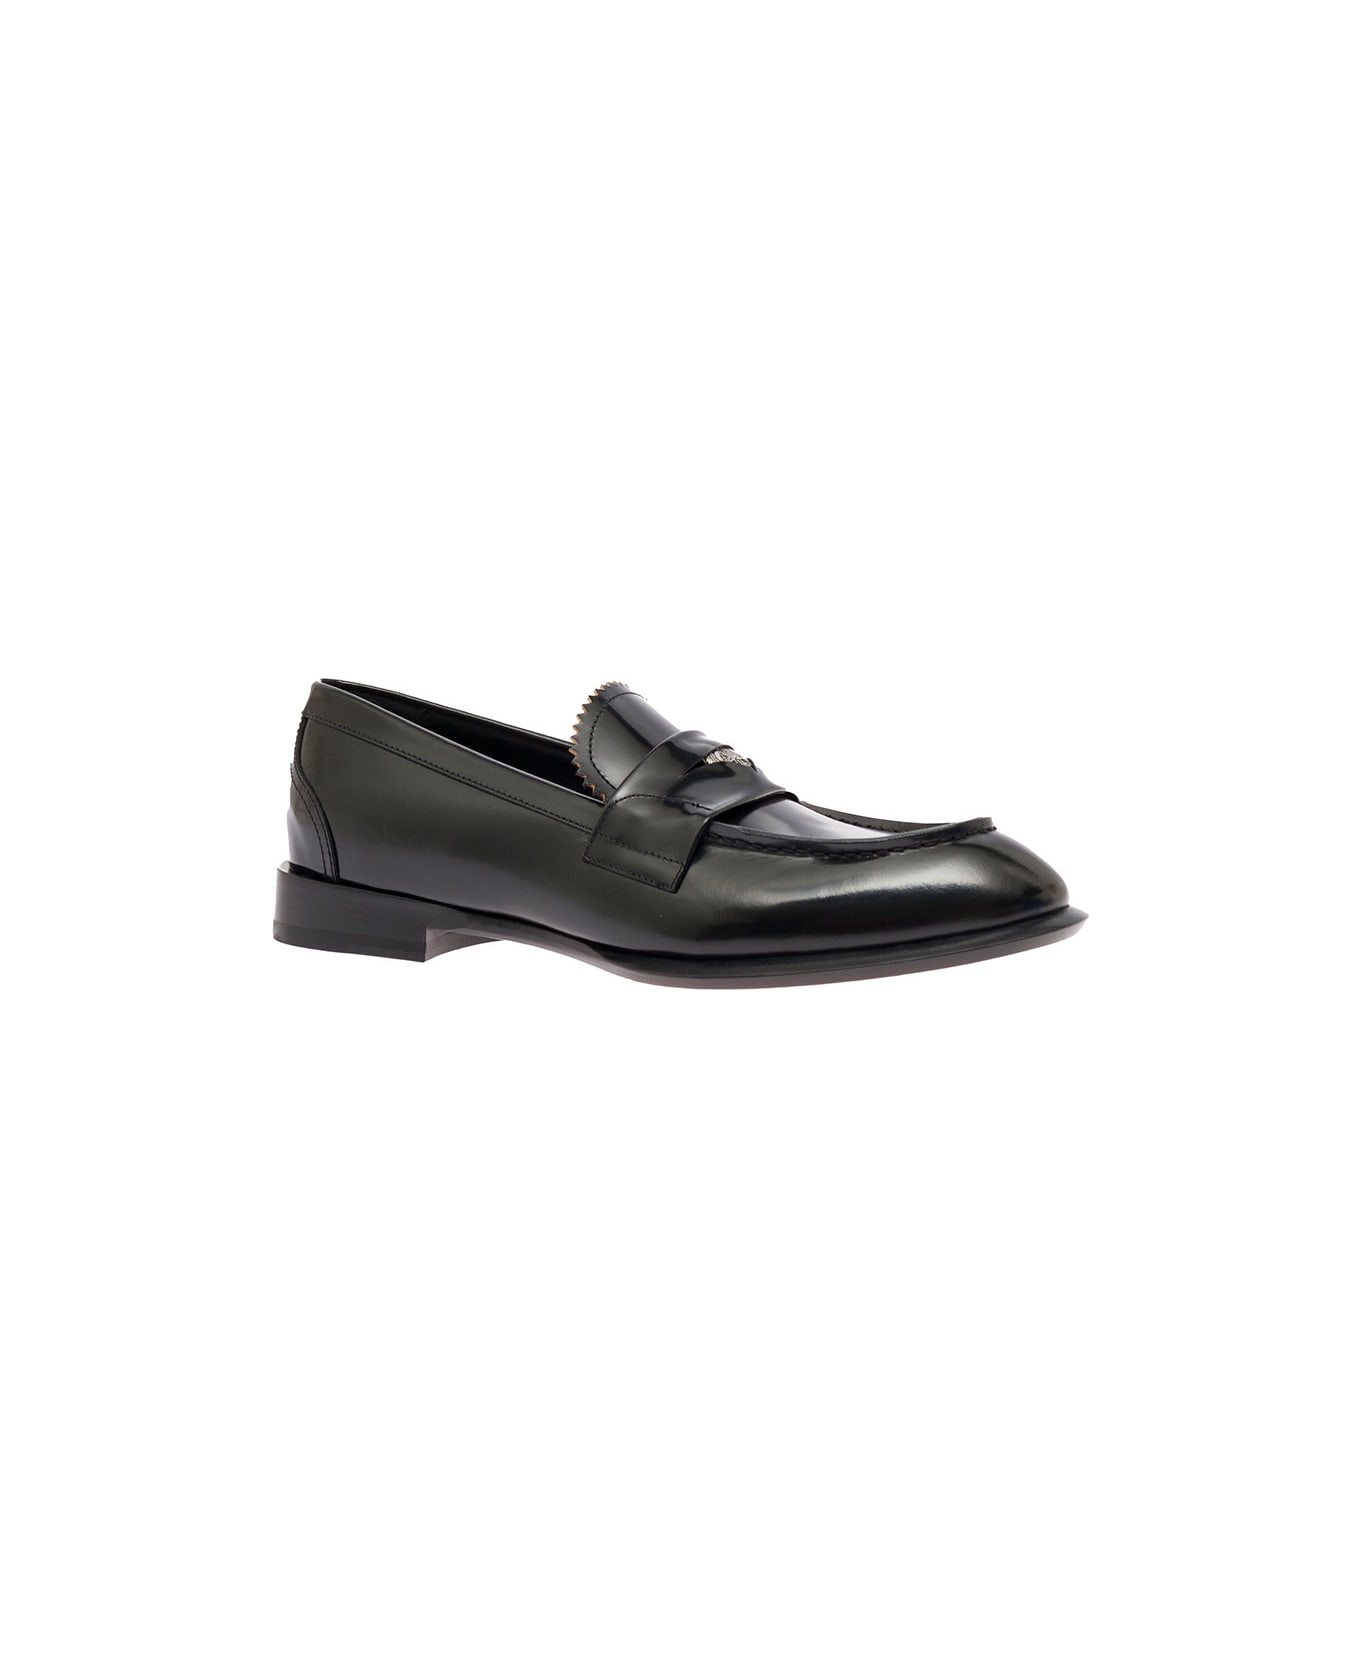 Alexander McQueen Man's Black Leather Loafers With Logo - Black ローファー＆デッキシューズ